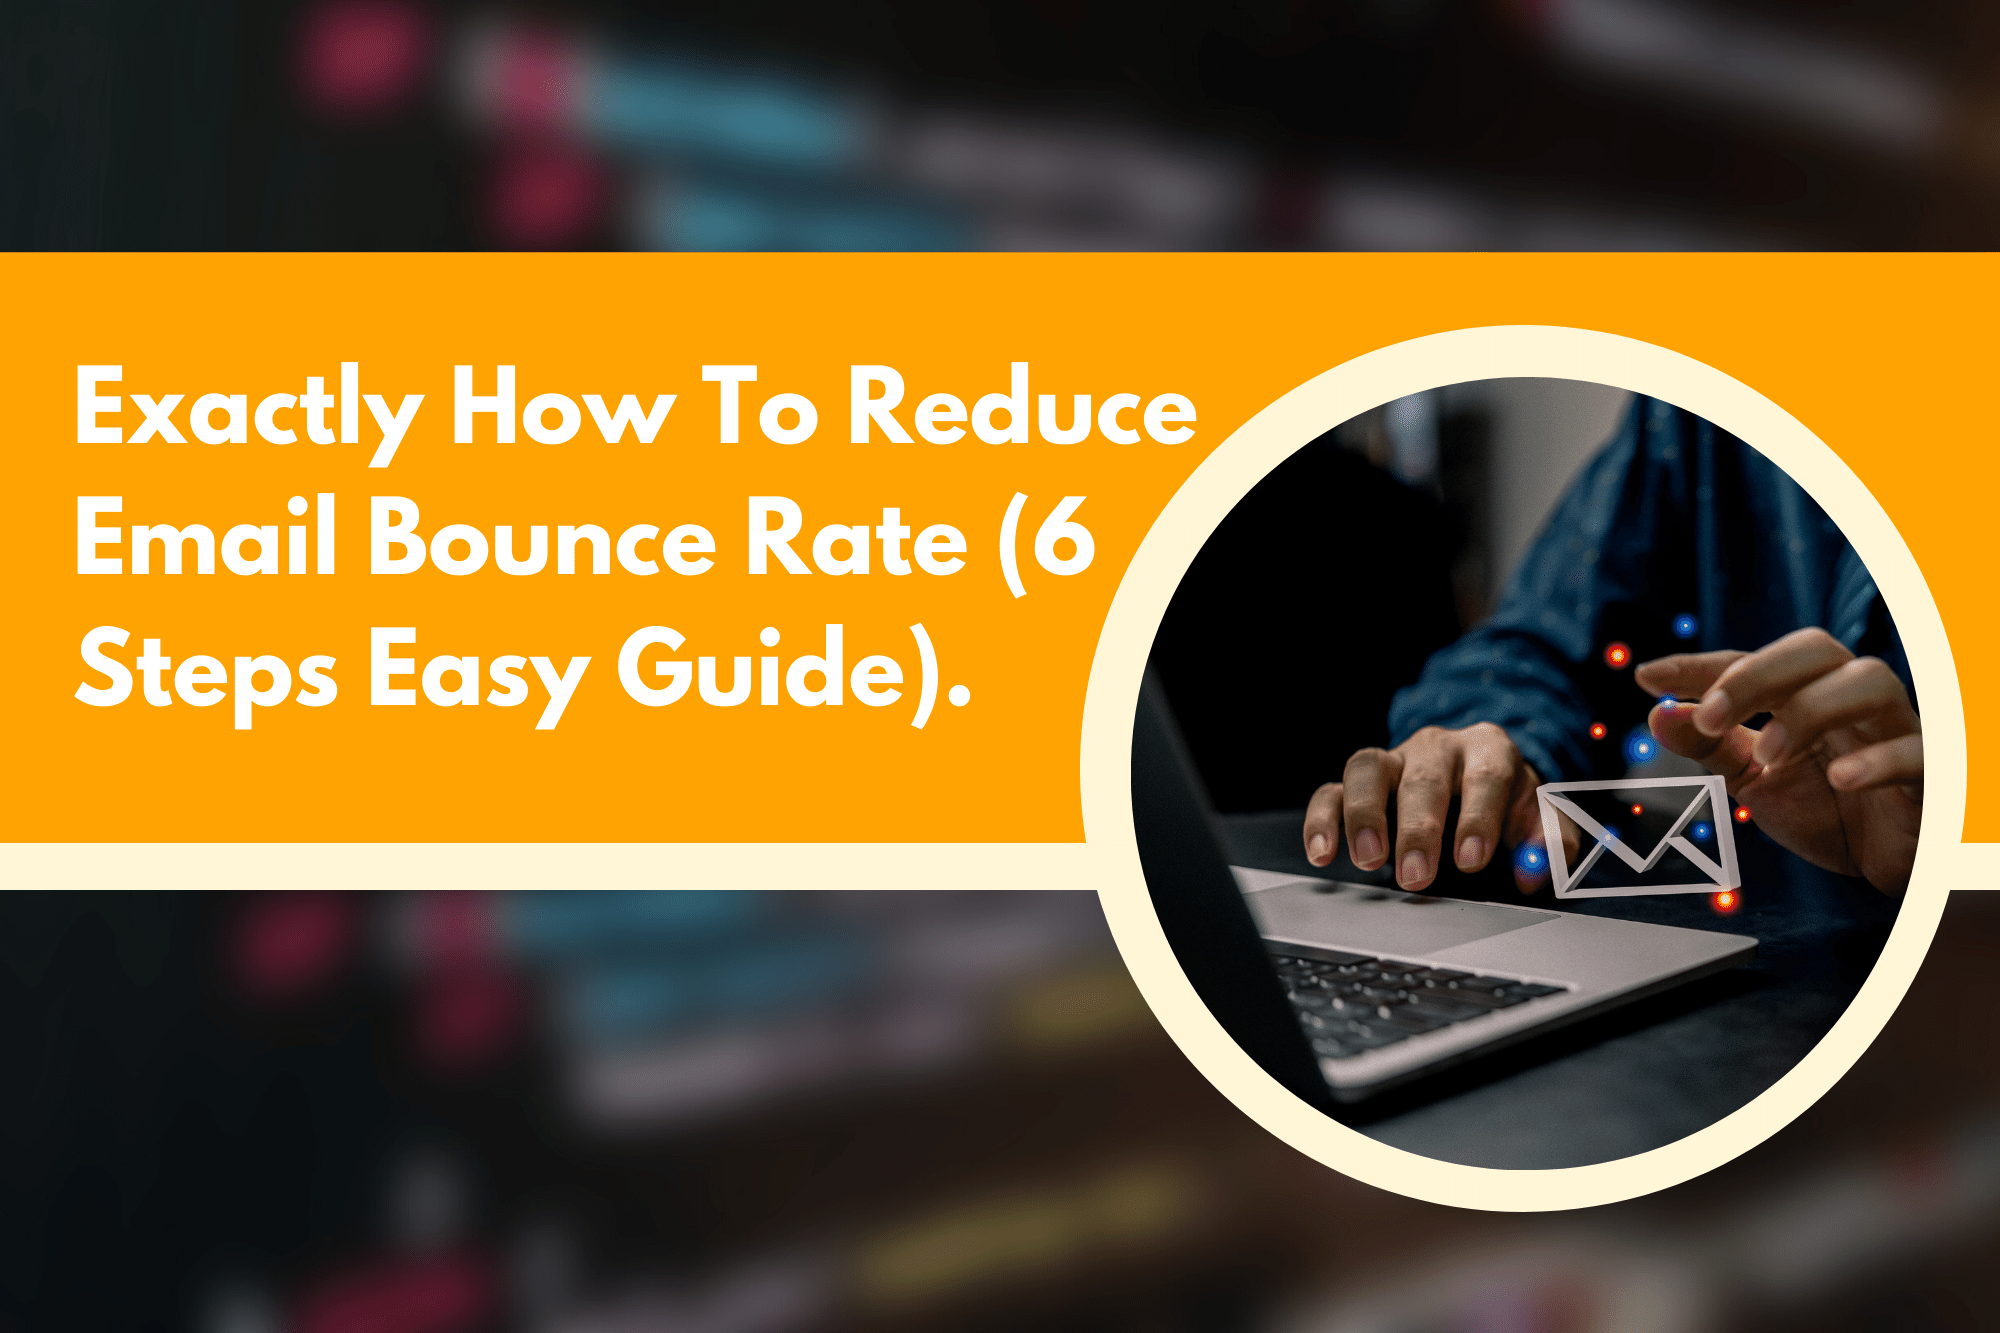 Exactly How To Reduce Email Bounce Rate (6 Steps Easy Guide)